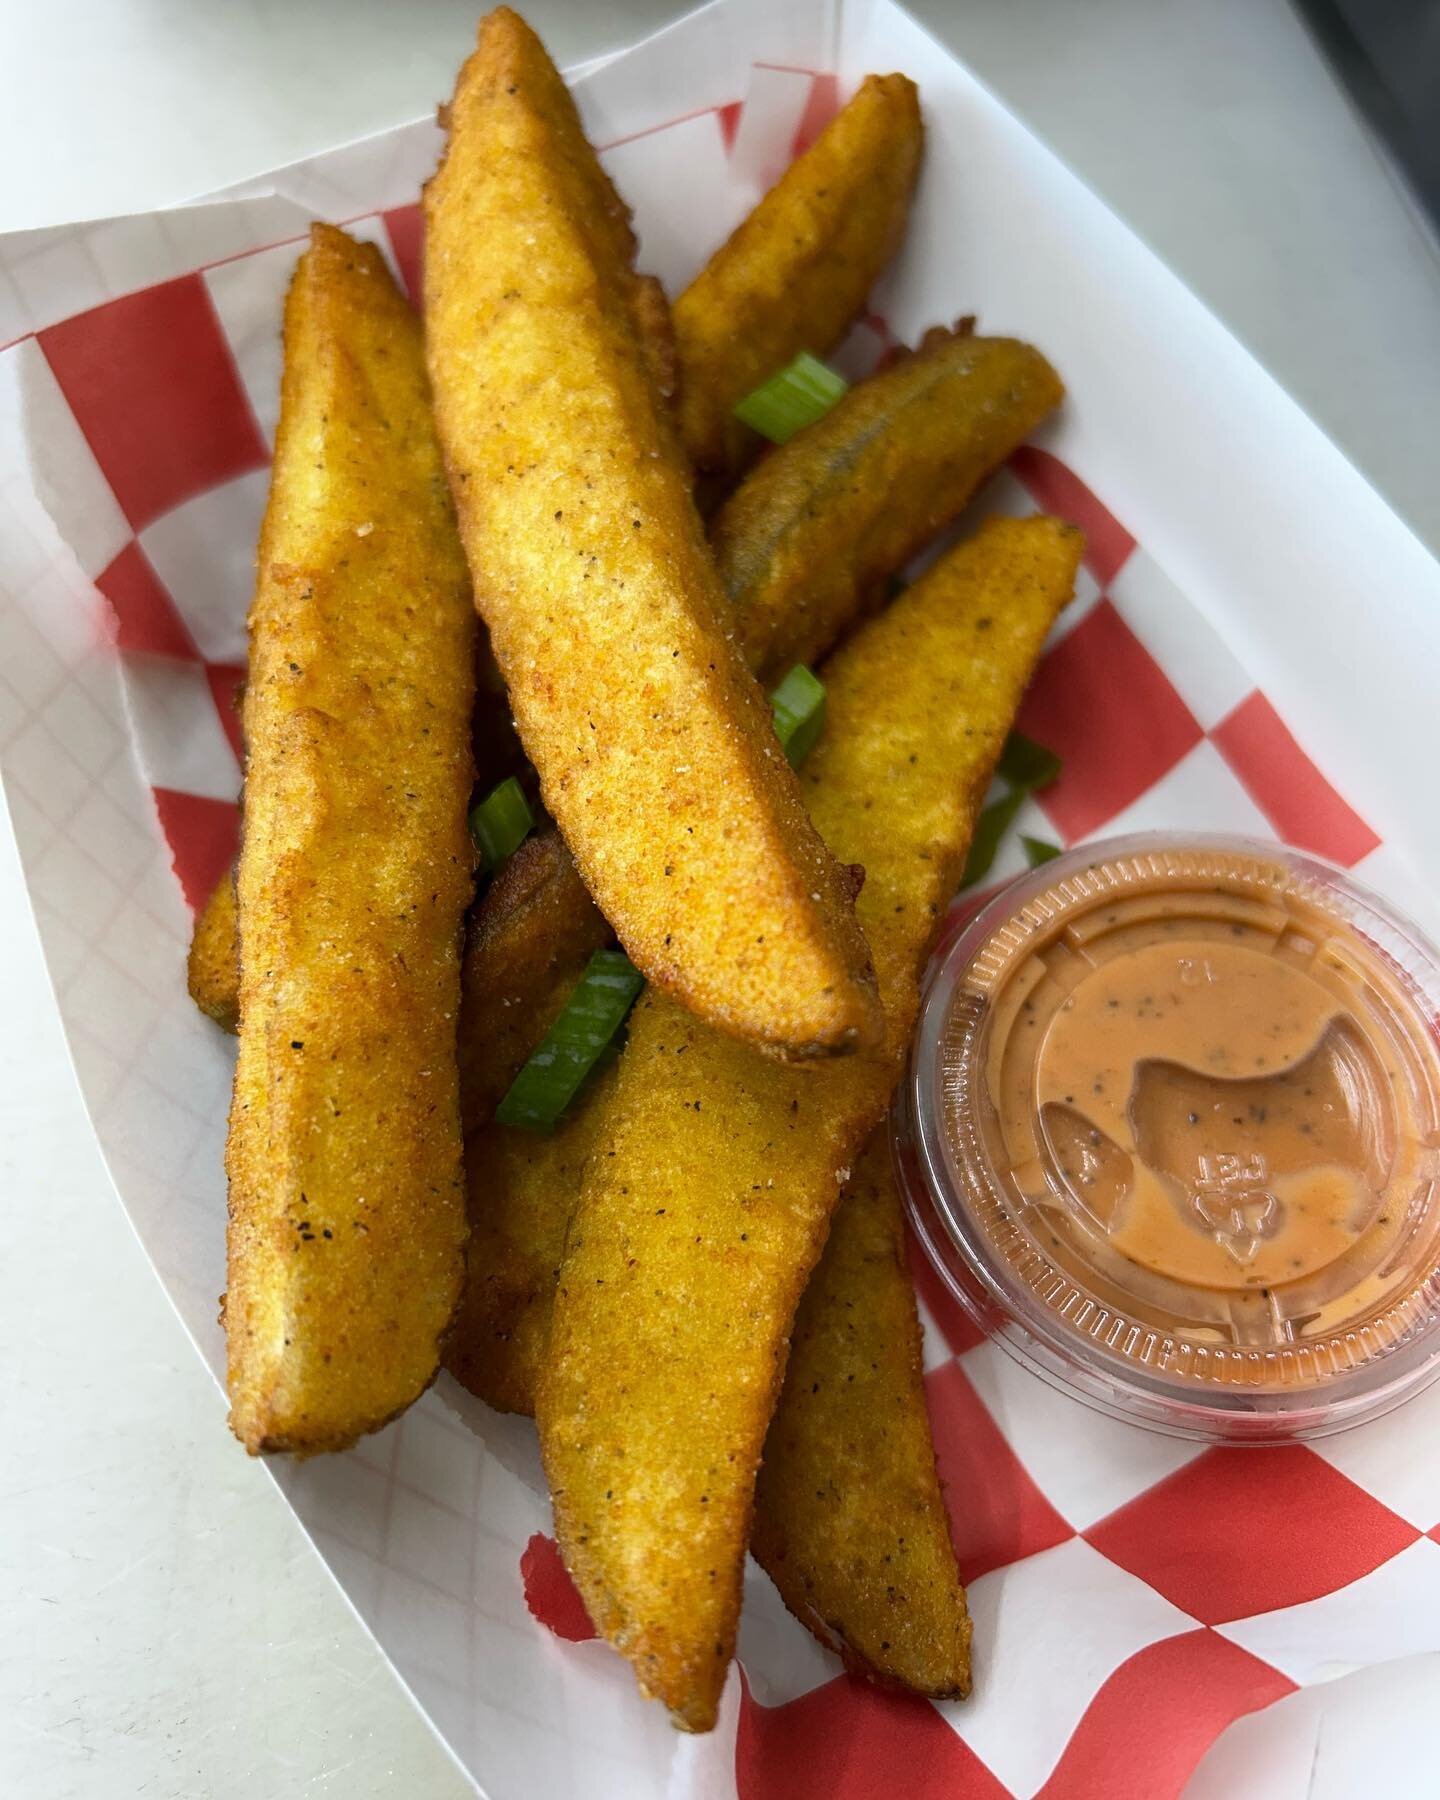 Find us tonight from 4:30-8:30 at @quenchedandtempered on Jackson St in downtown #toledo.  We still have the crispy and Dill-licious Fried Pickles on special as well as fresh cookies from @vegan_taste419  Let us serve you a #vegan wiener!! #veg #vega